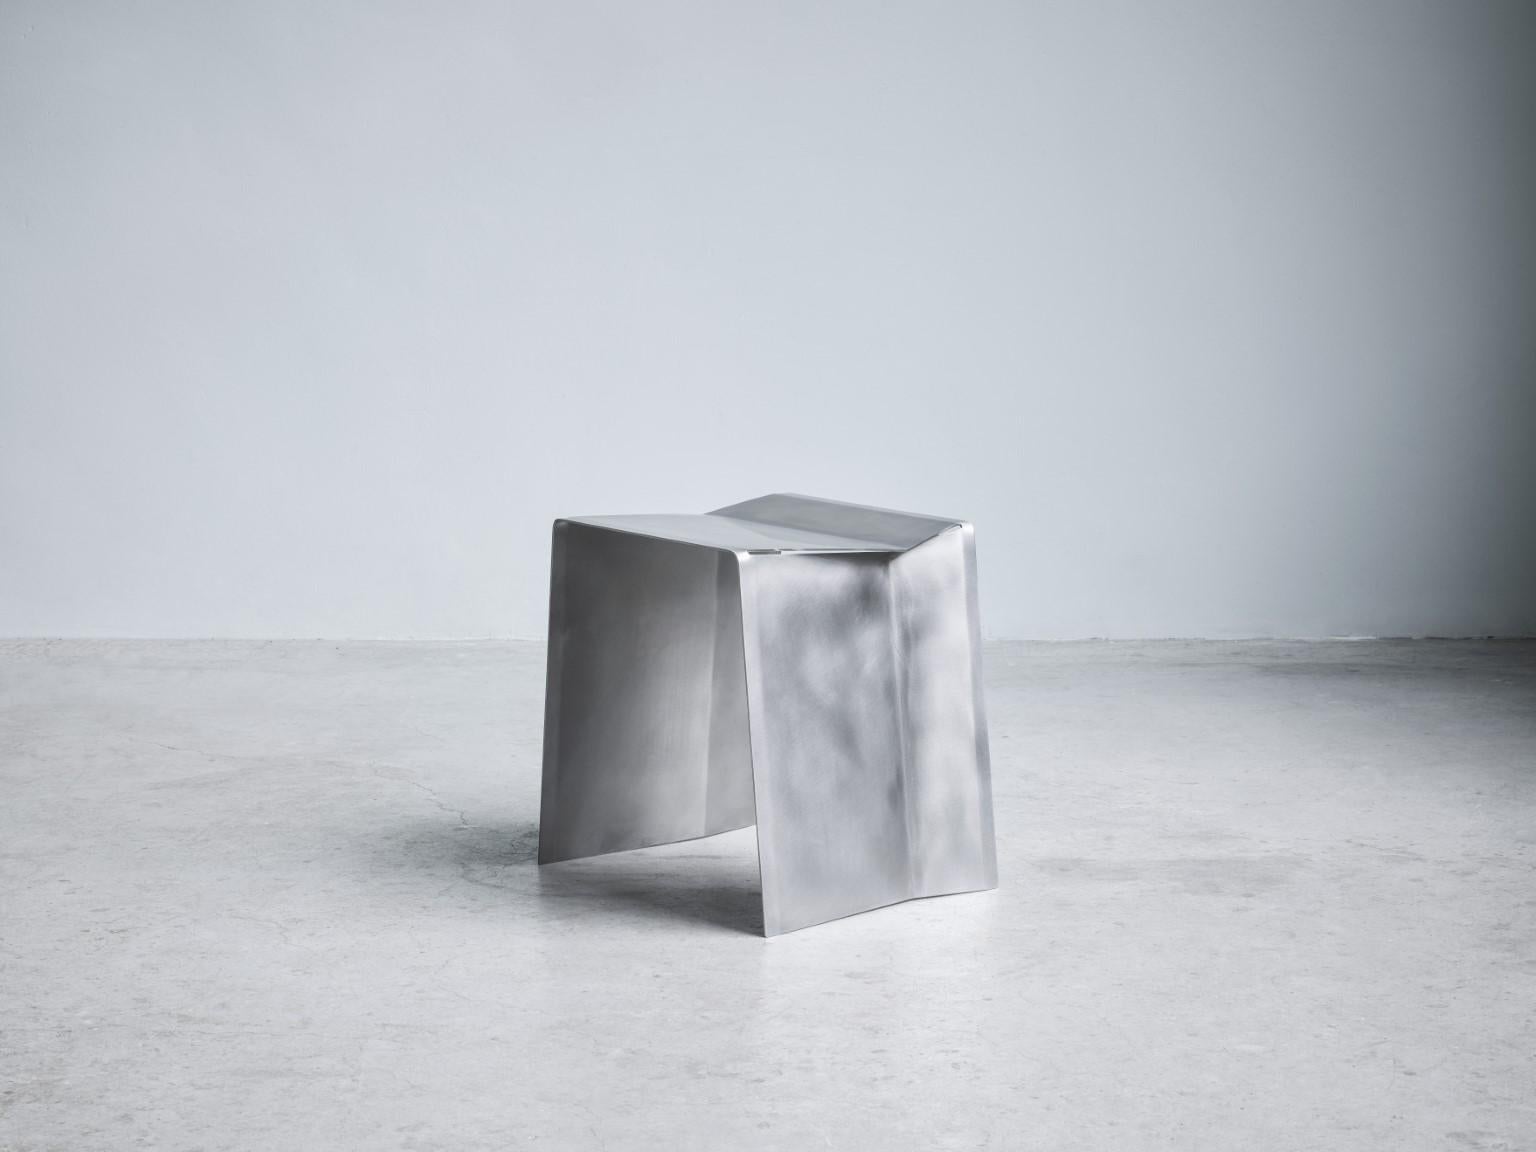 Camber stool, Paul Coenen
Dimensions: W 47 x D 37 x H 45 cm
Materials: Stainless steel

The Camber bench and stool originated from the idea of manufacturing a piece of furniture from a single piece of sheet metal.

The inclining angle of the